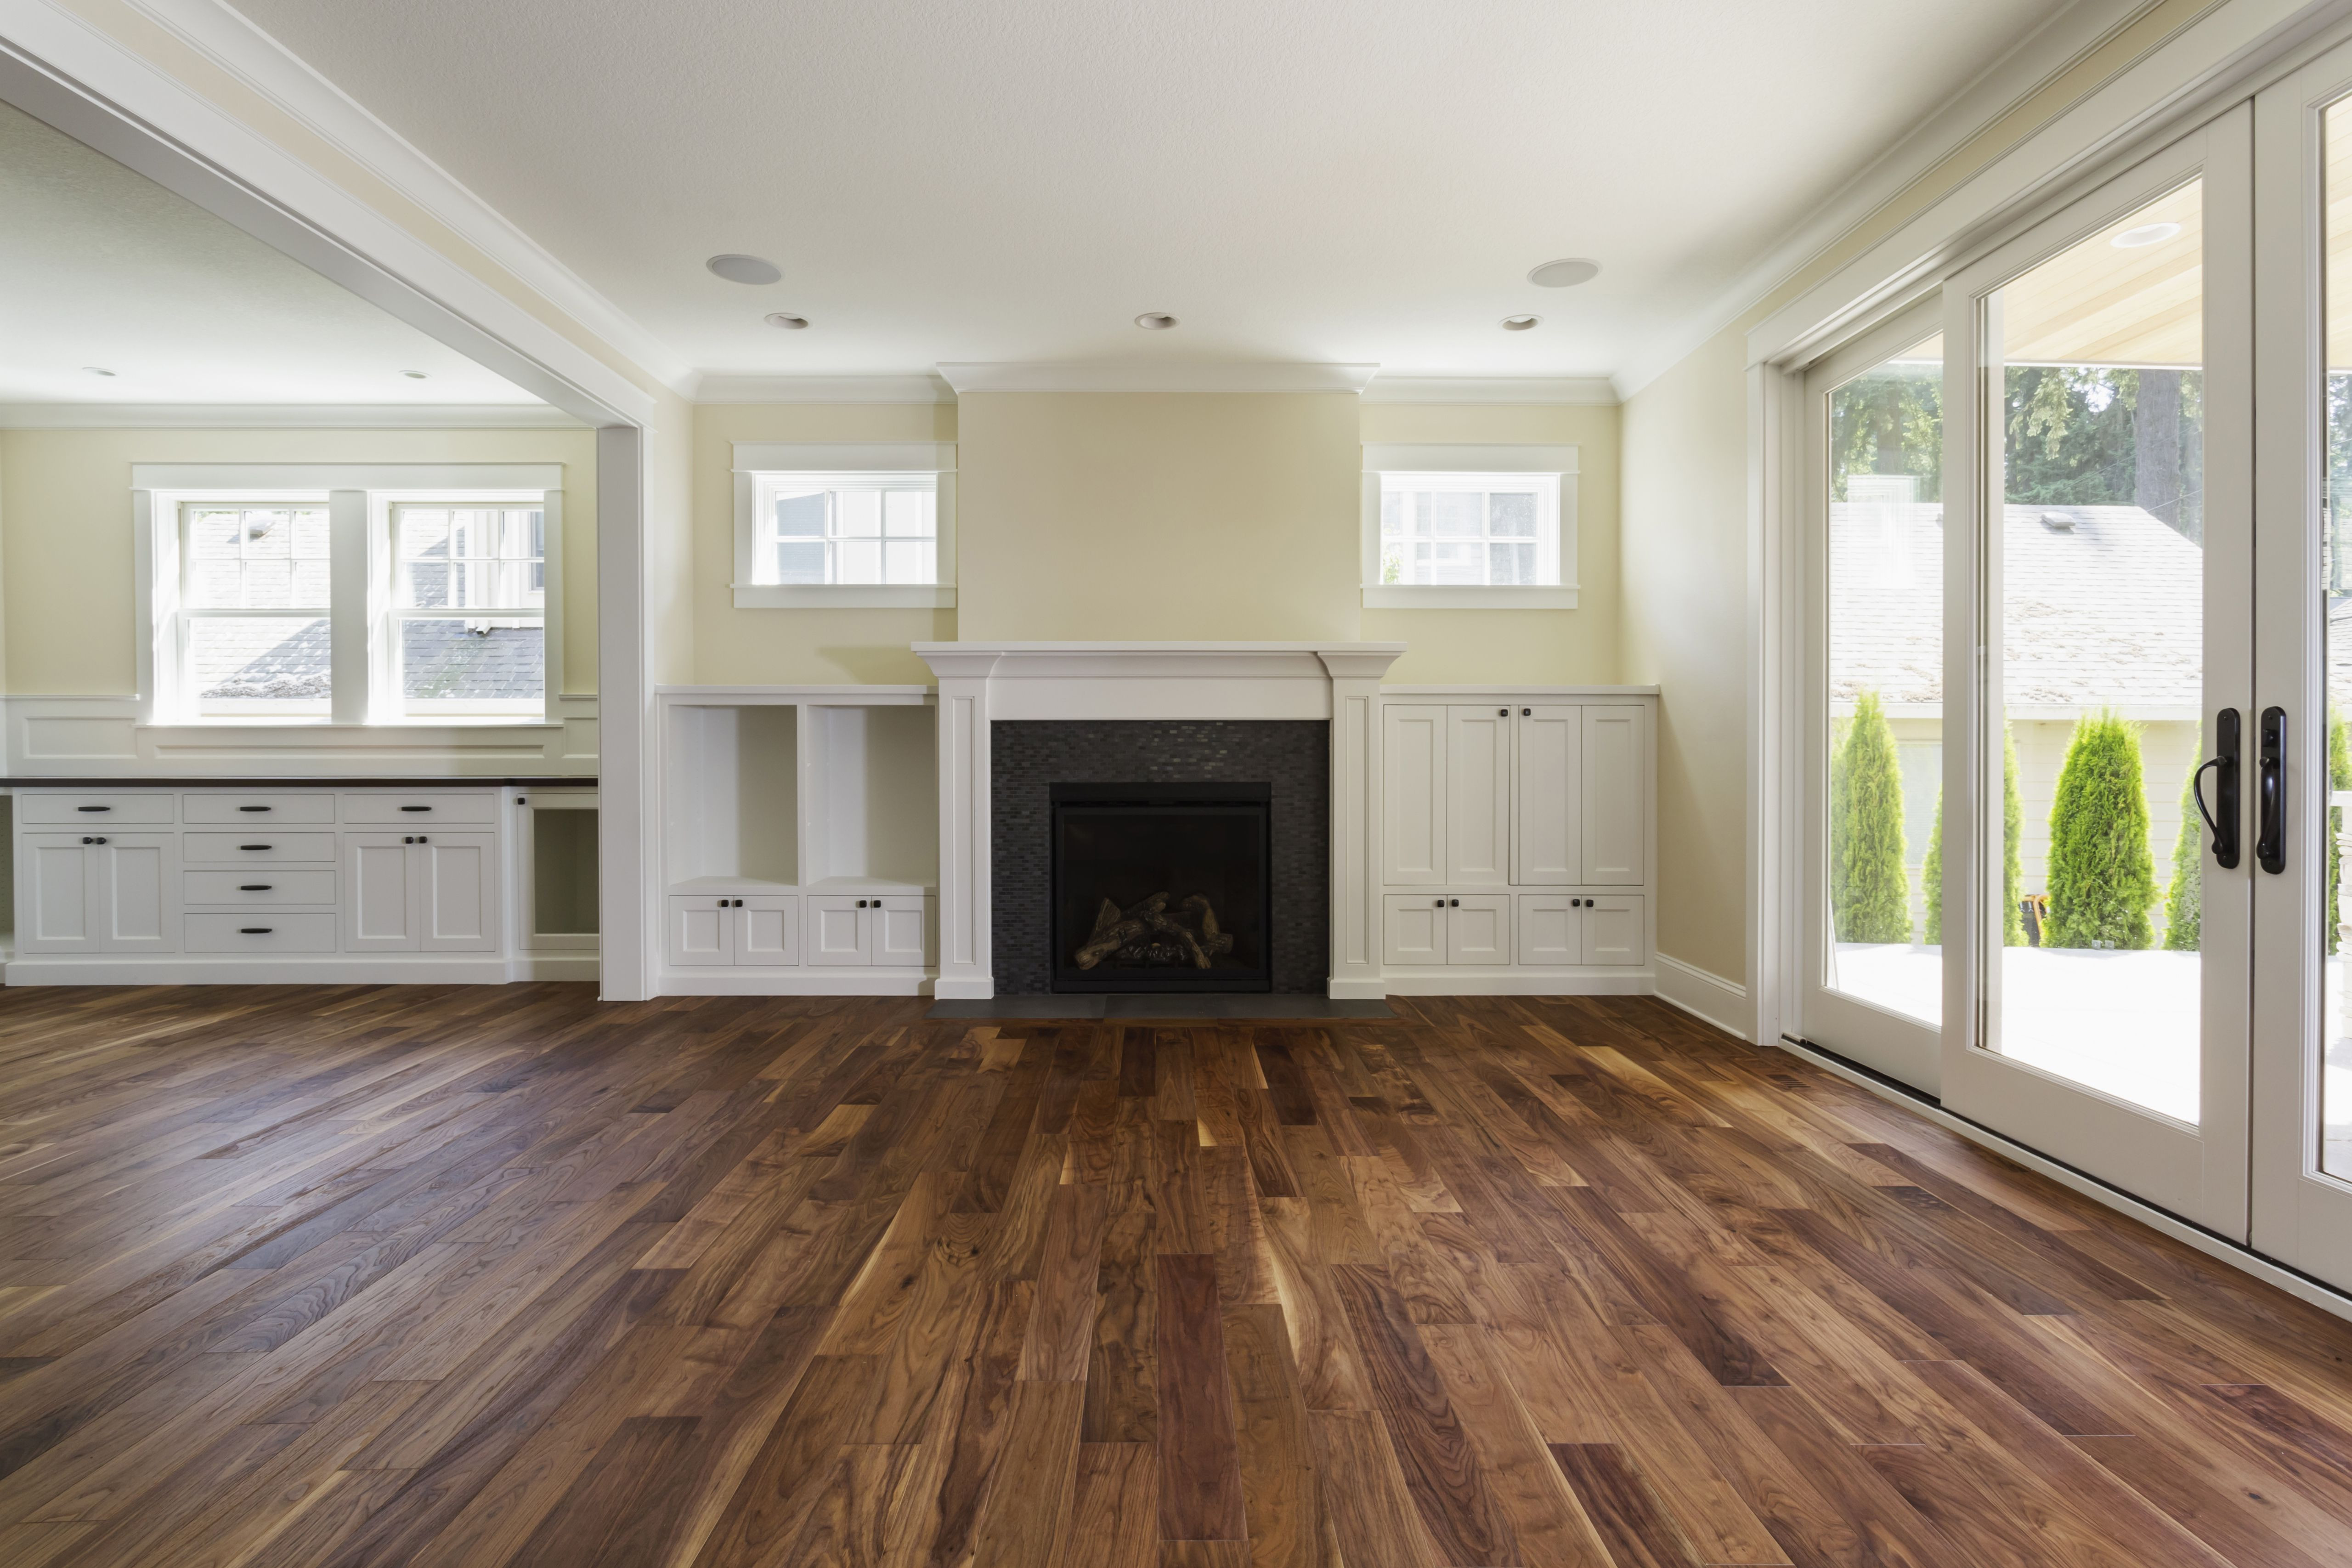 filling gaps in old hardwood floors of the pros and cons of prefinished hardwood flooring with regard to fireplace and built in shelves in living room 482143011 57bef8e33df78cc16e035397